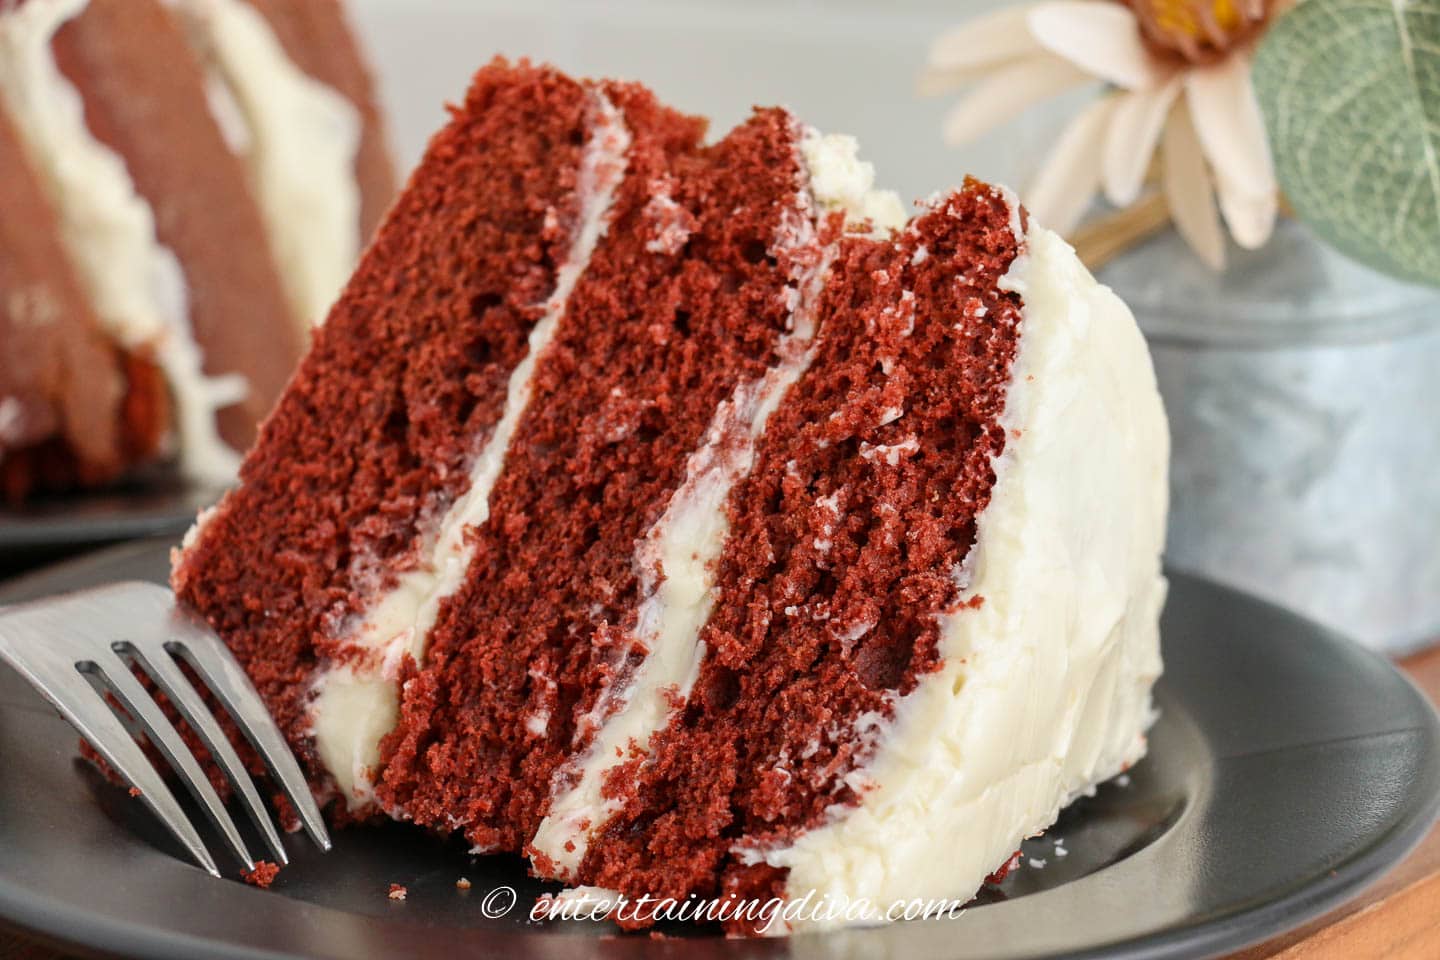 A piece of red velvet cake on a plate with a fork